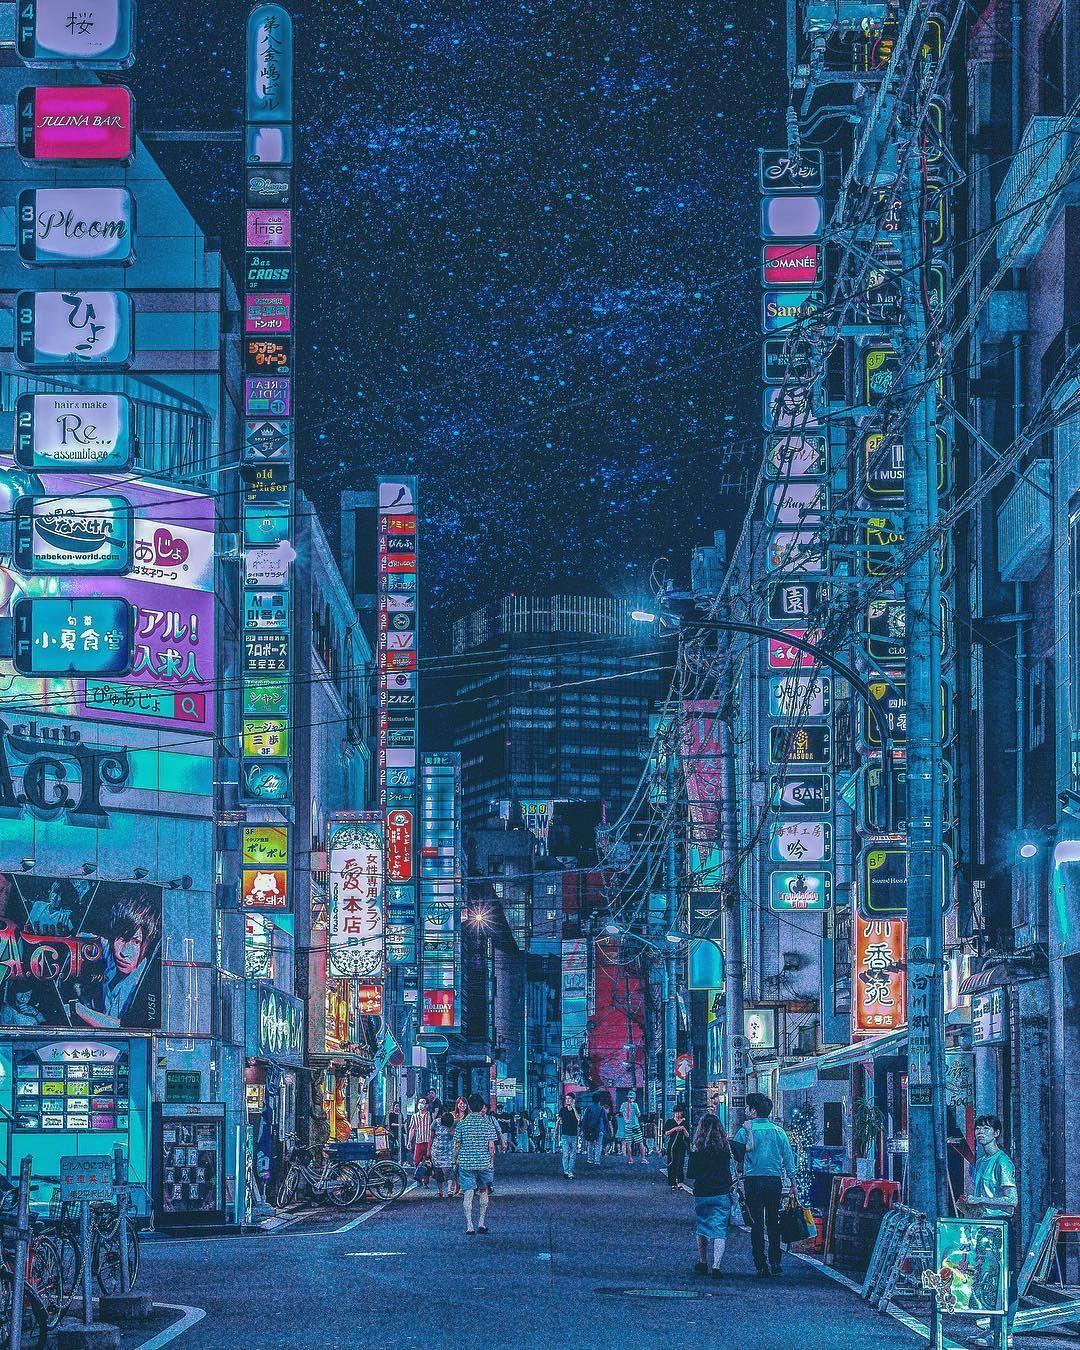 A city street with many neon lights - Tokyo